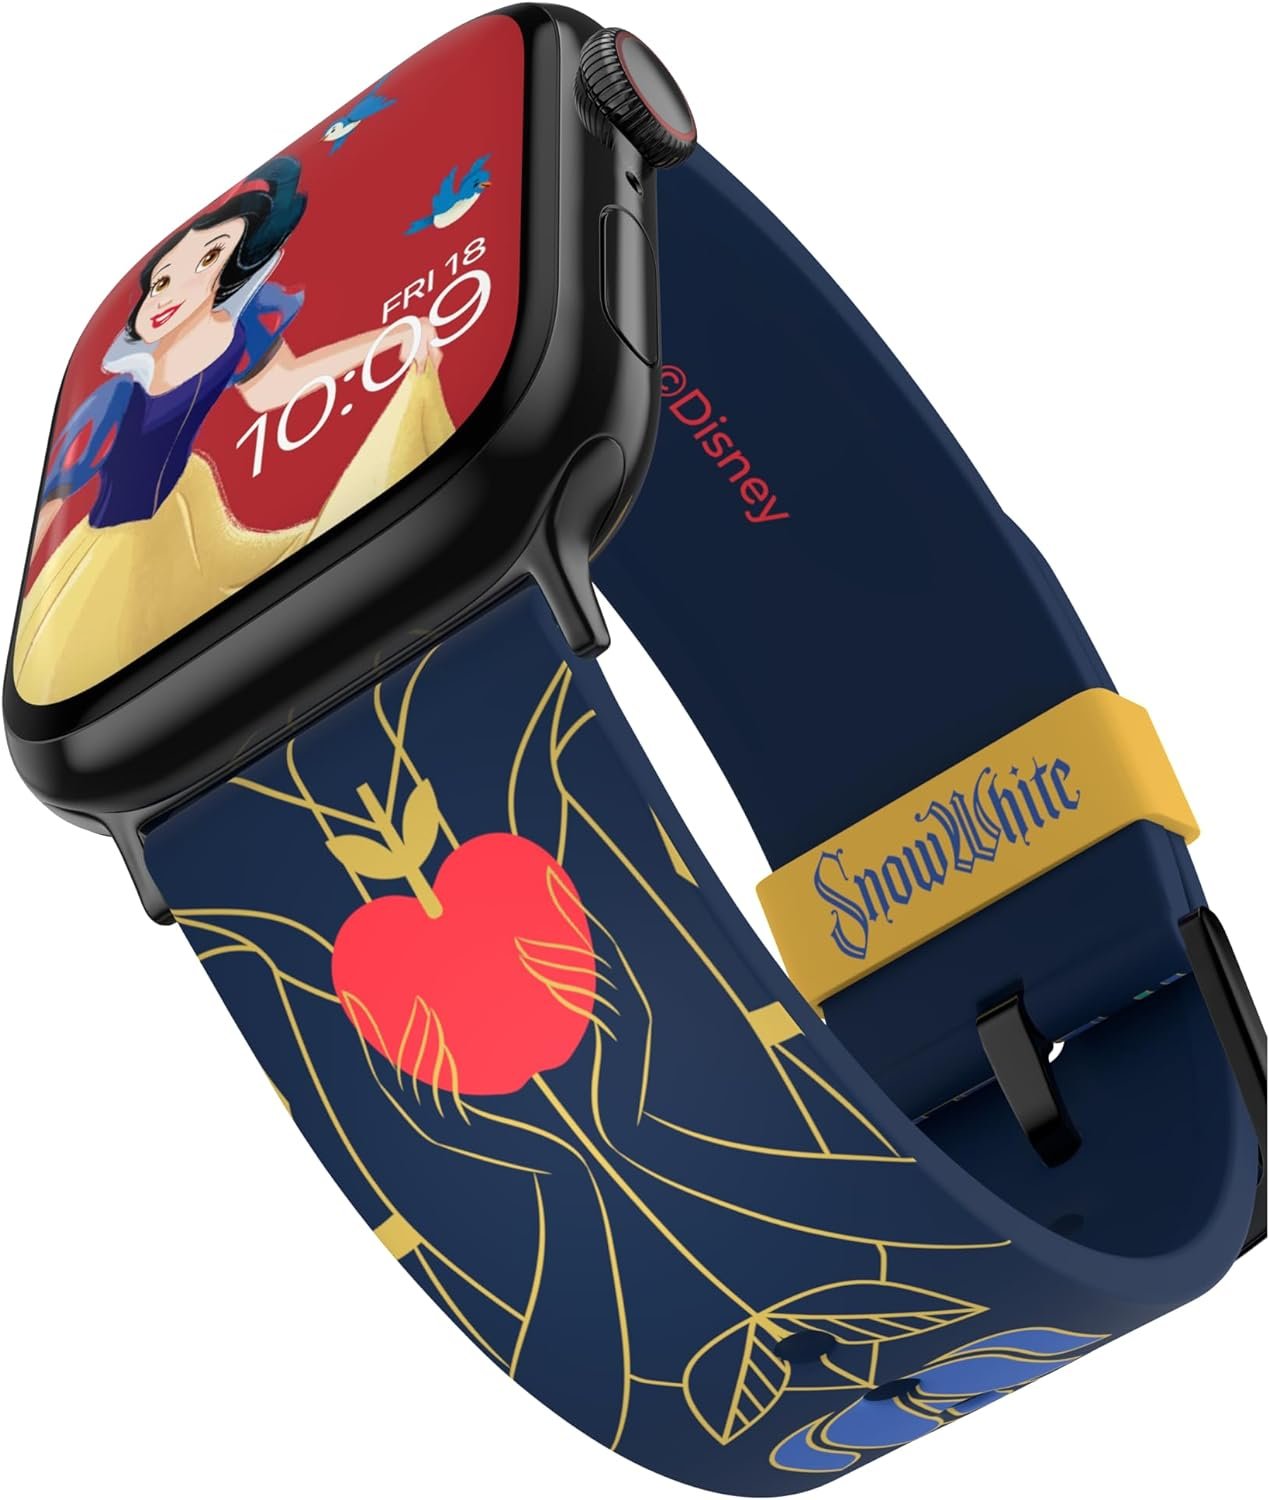 Disney Smartwatch Band Review